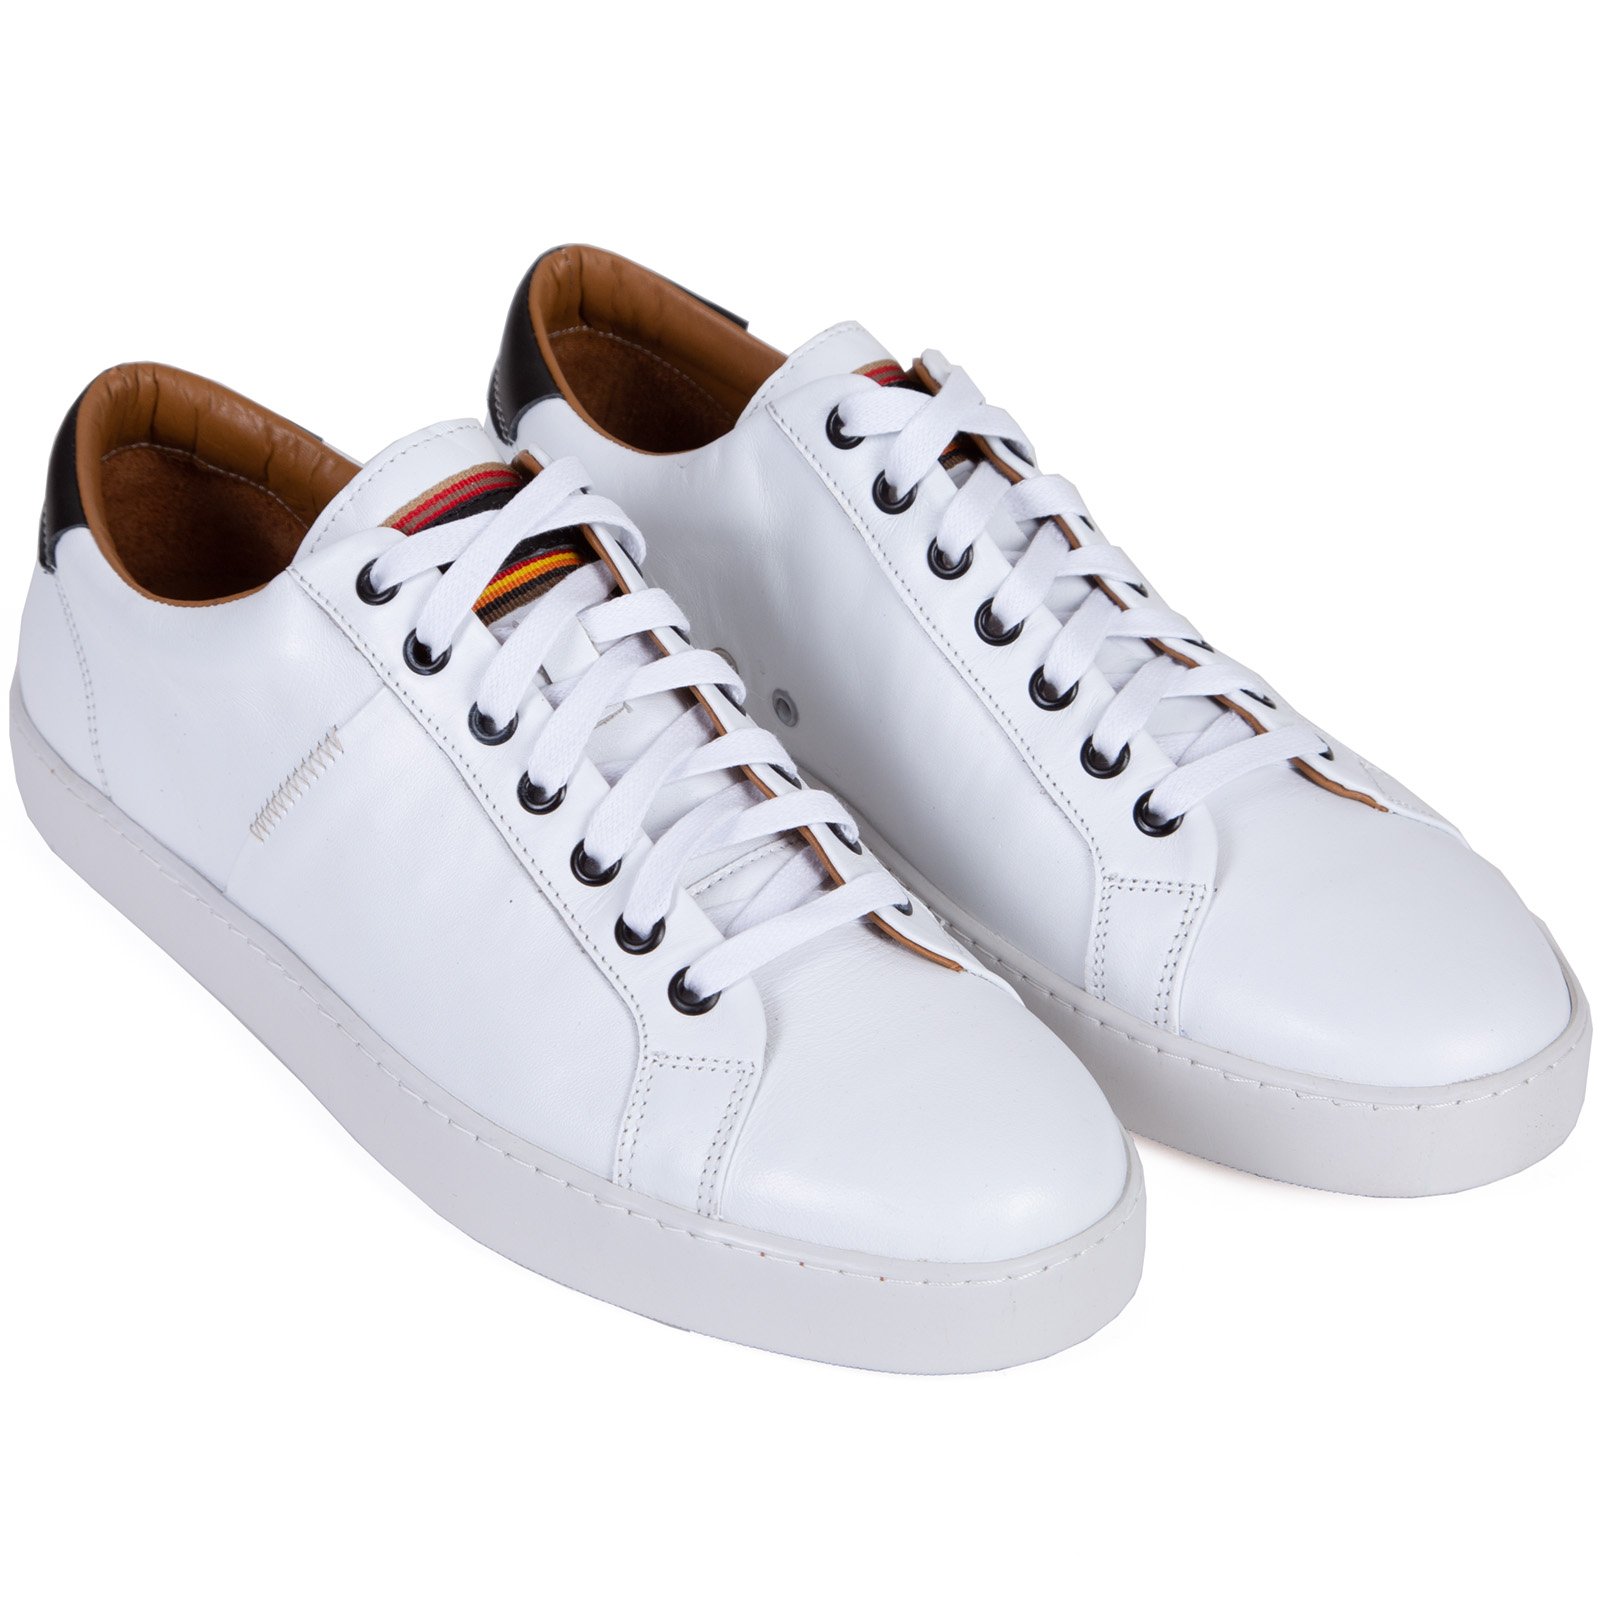 Versa White Leather Sneakers - Shoes & Boots-Casual Shoes : Fifth ...